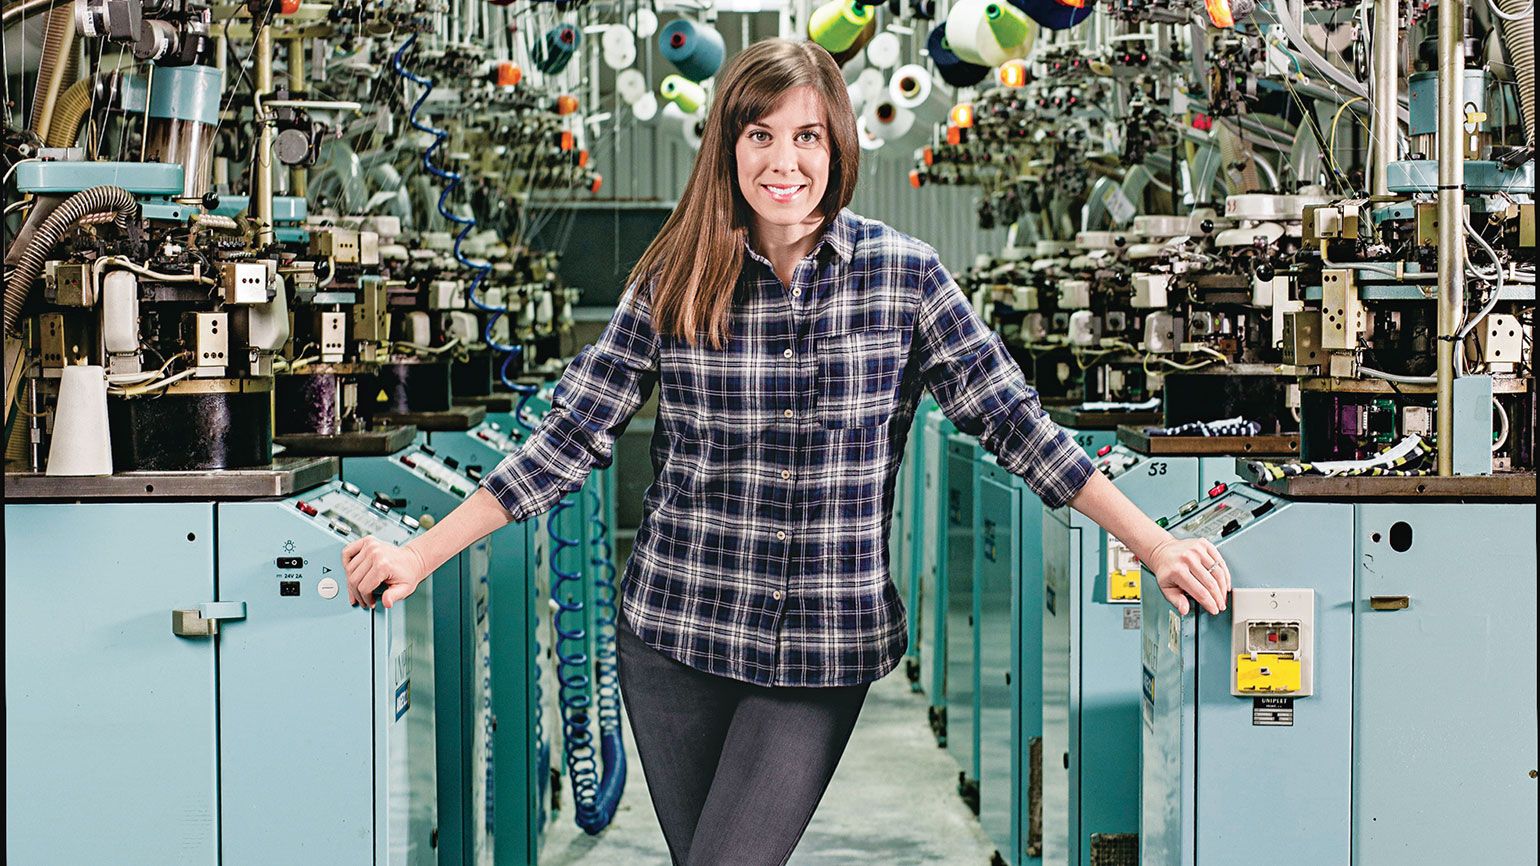 Gina Locklear oversees every step of sock manufacturing at the Emi-G Knitting mill